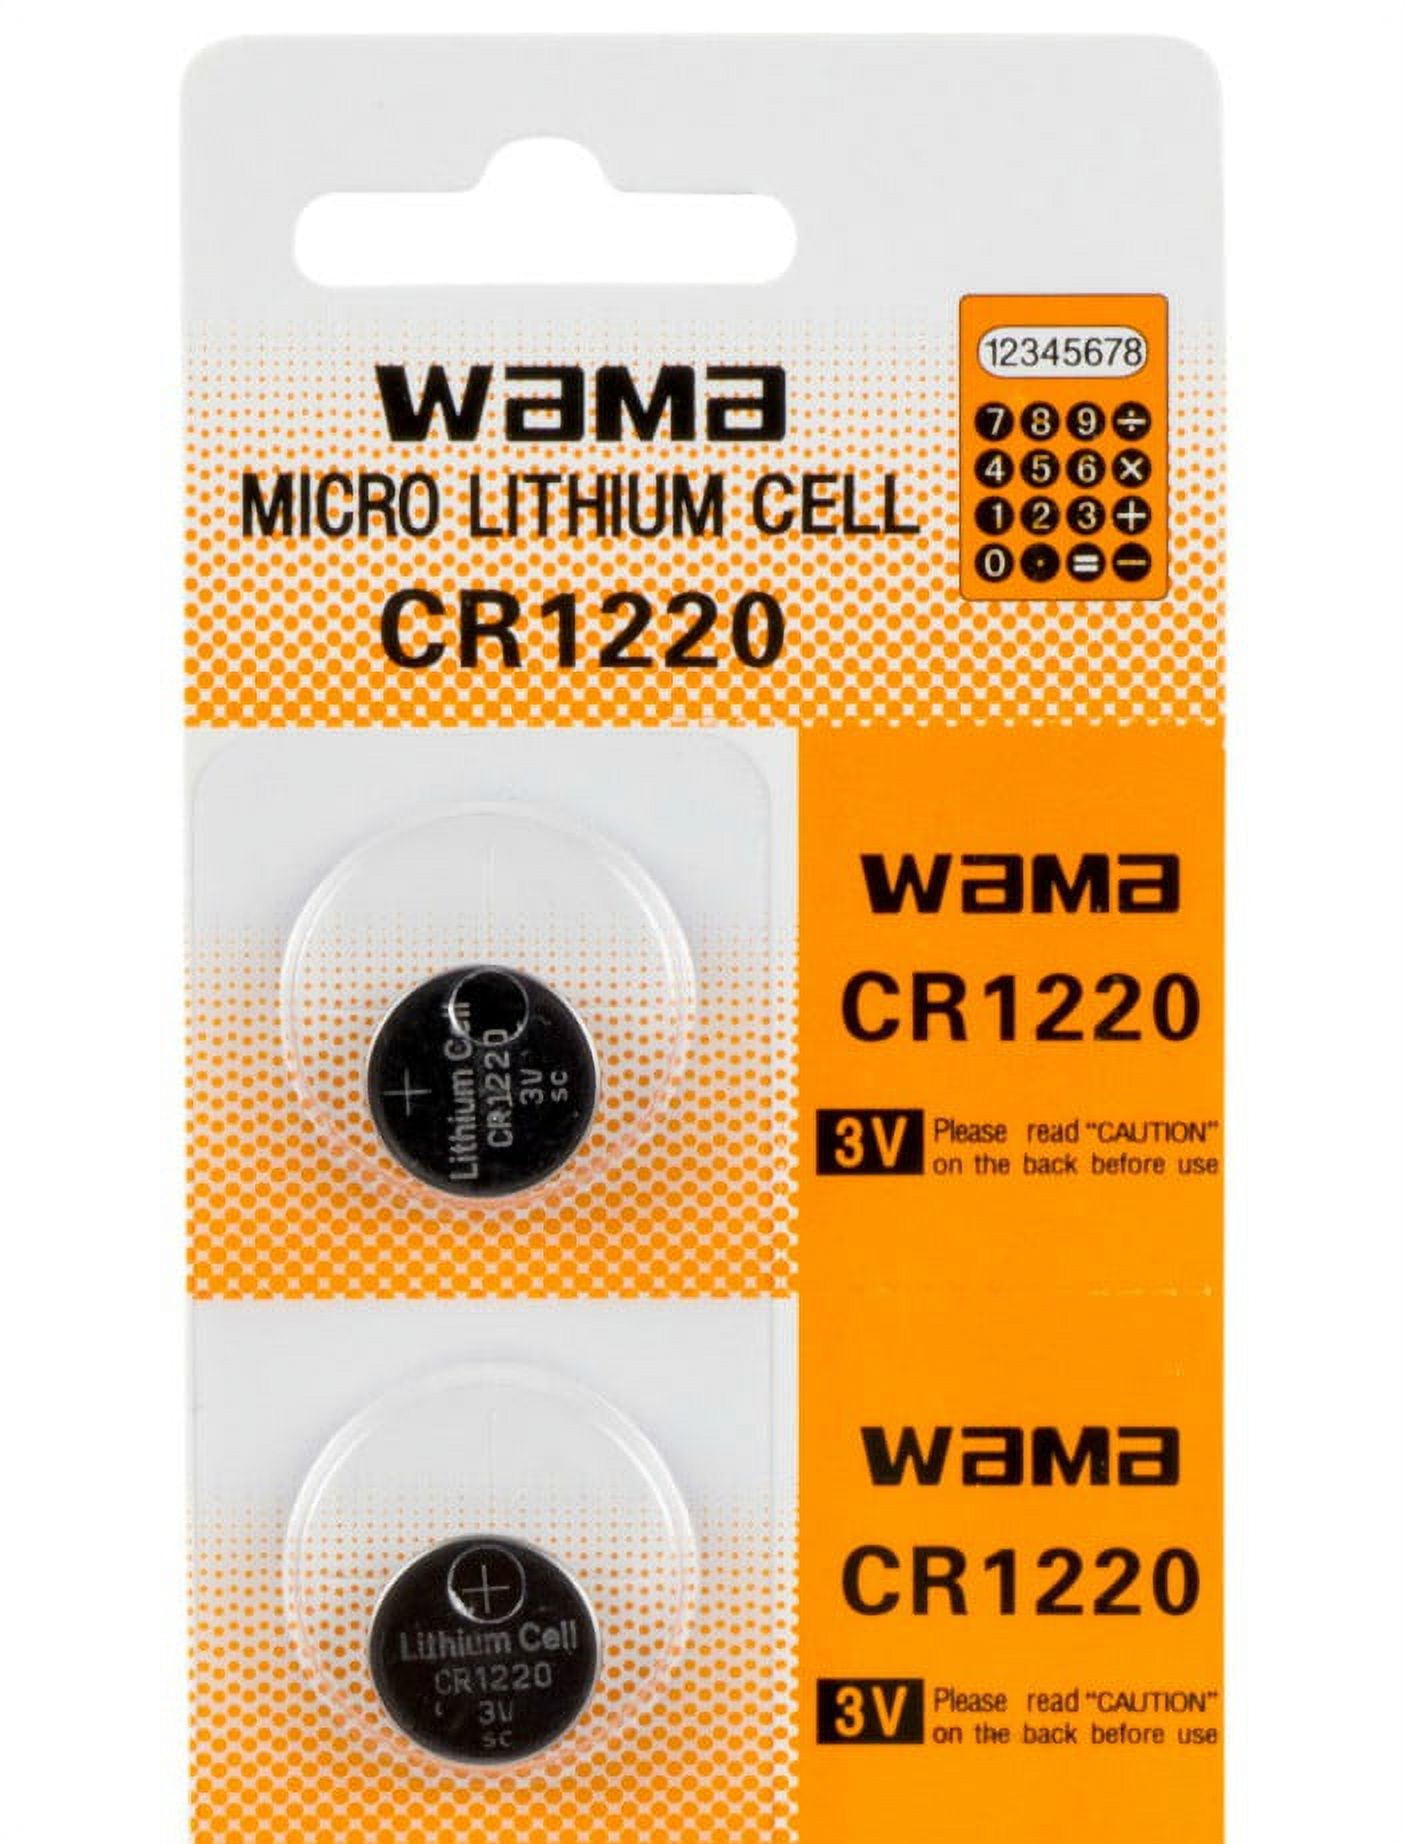 LiCB 10 Pack CR1220 3V Lithium Coin Battery Cr 1220 Battery 3 Volt Button  Cell